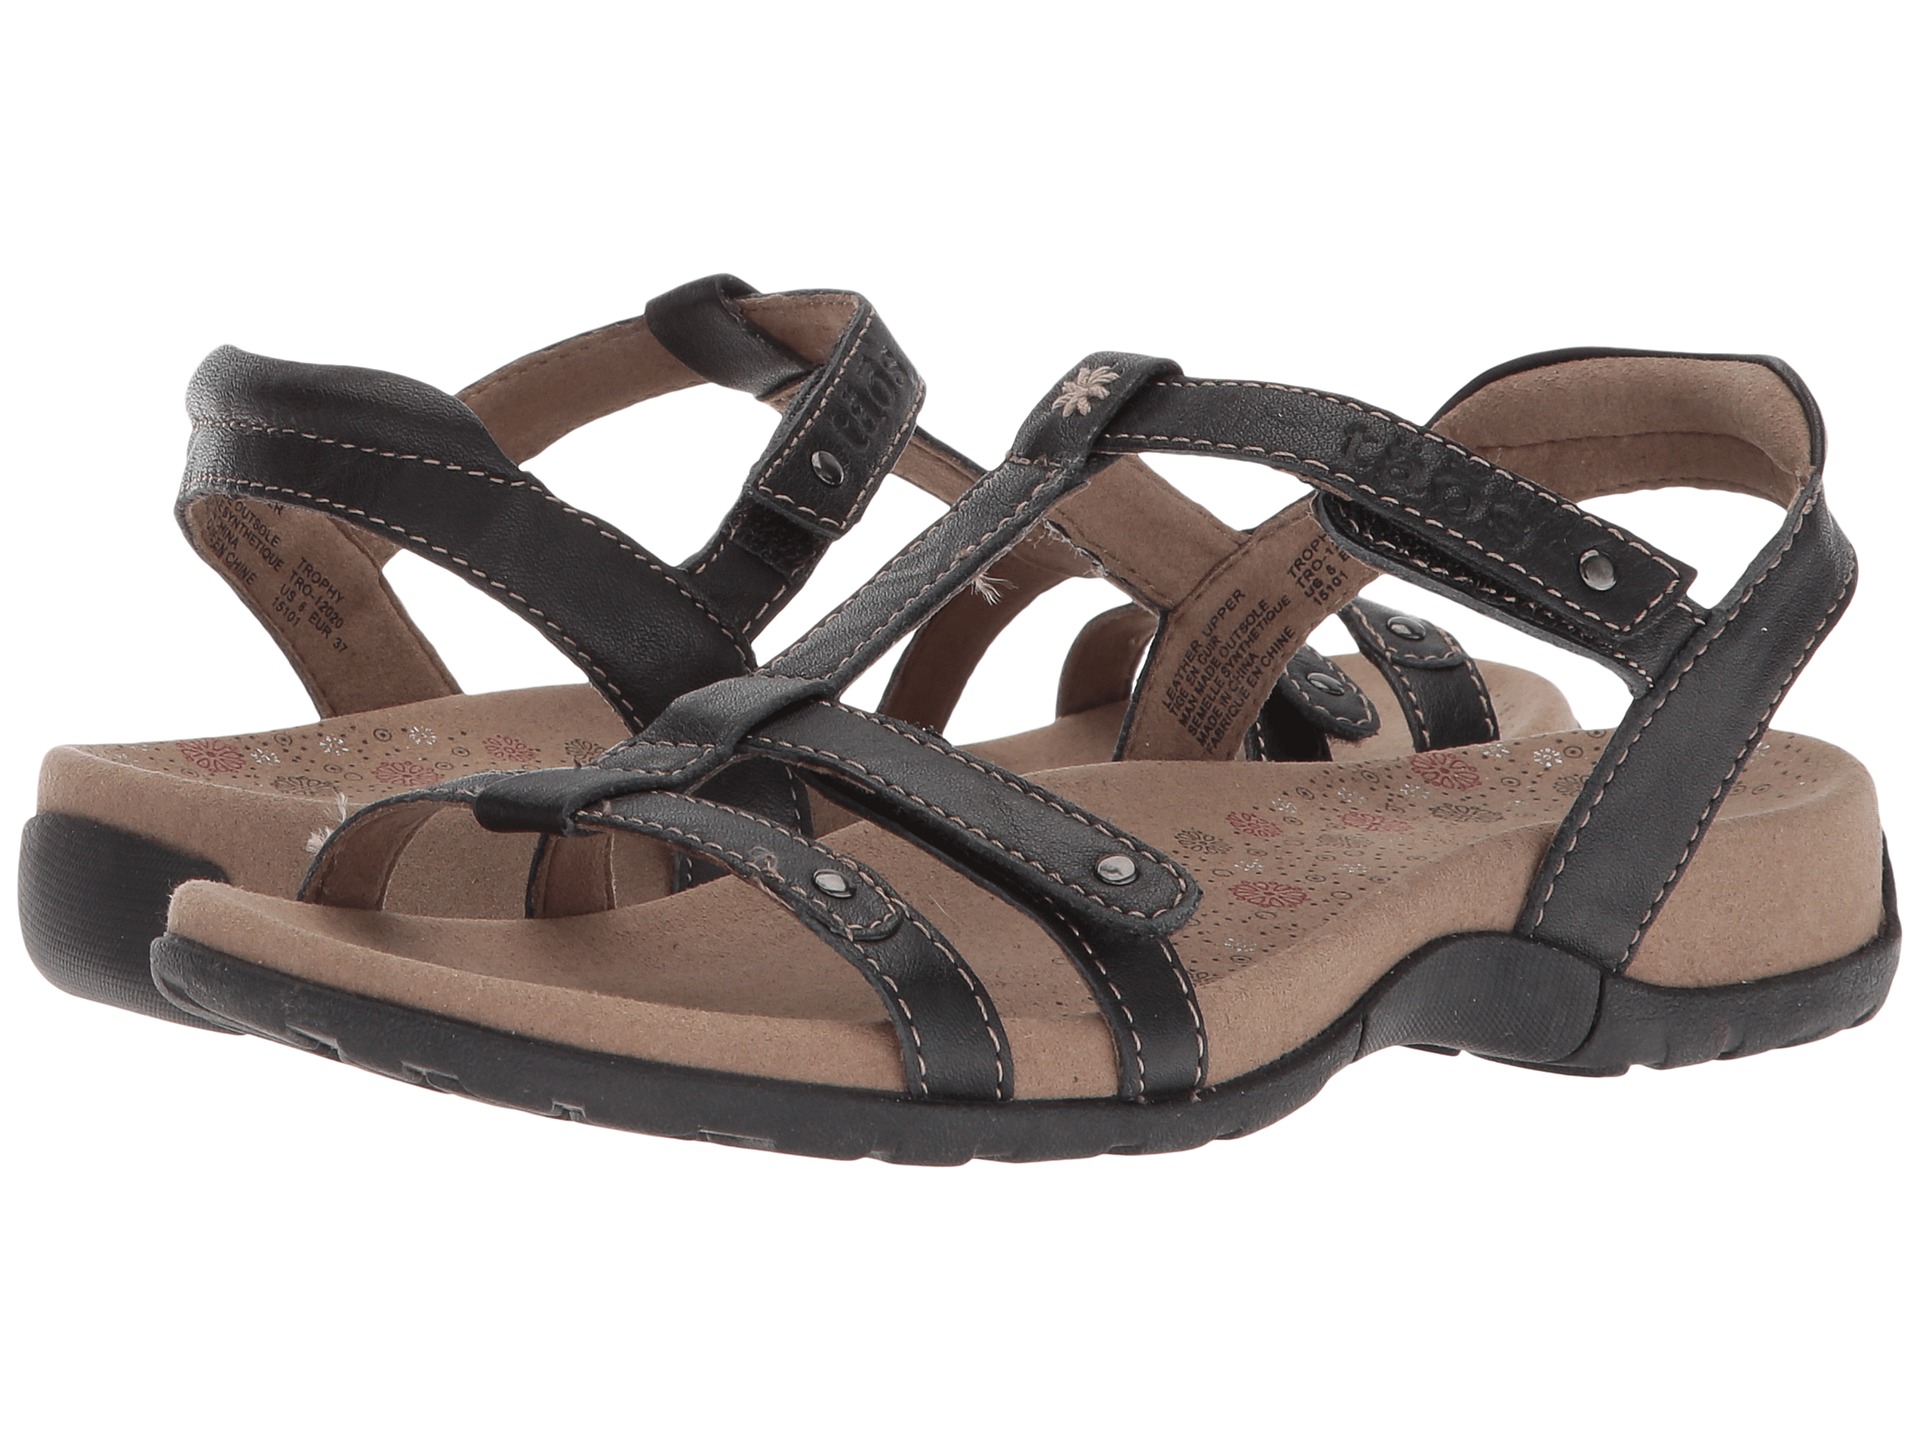 Zappos Taos Shoes | Dkny Sandals